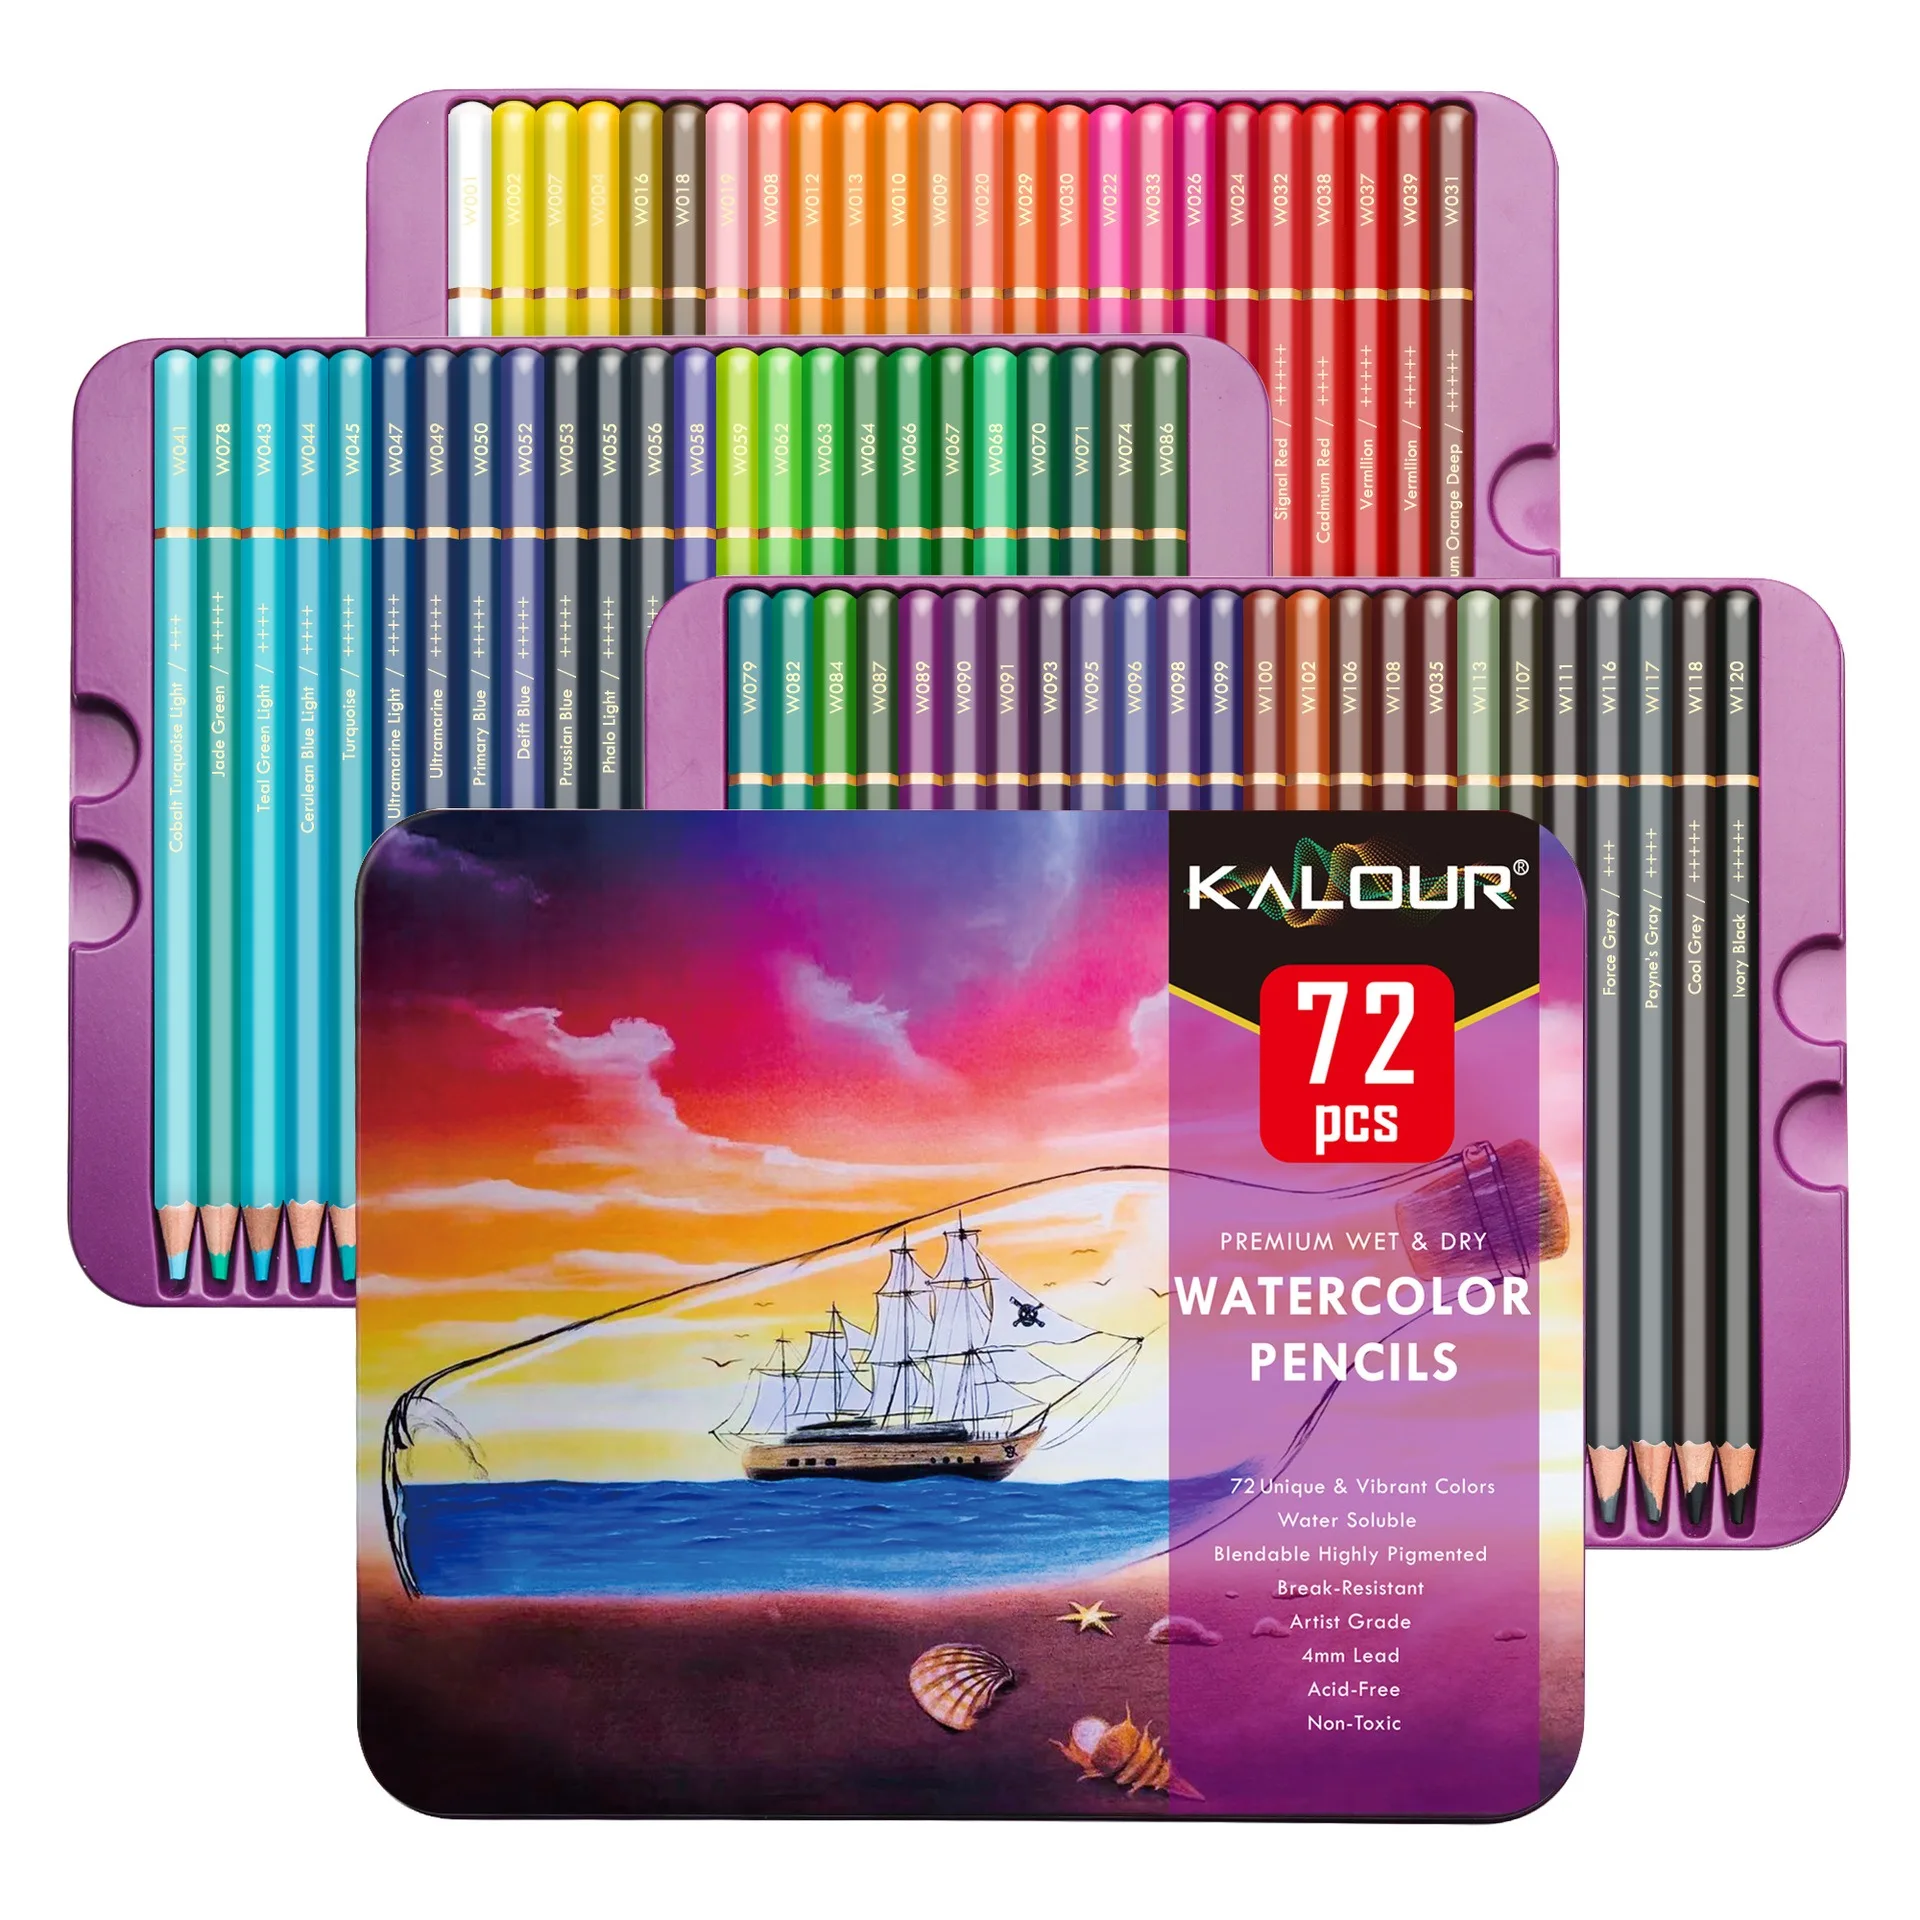 

Kalour Professional Watercolor Pencils,72 colored pencils Sketching Drawing For Adult Coloring Books For Artists Beginners Kids